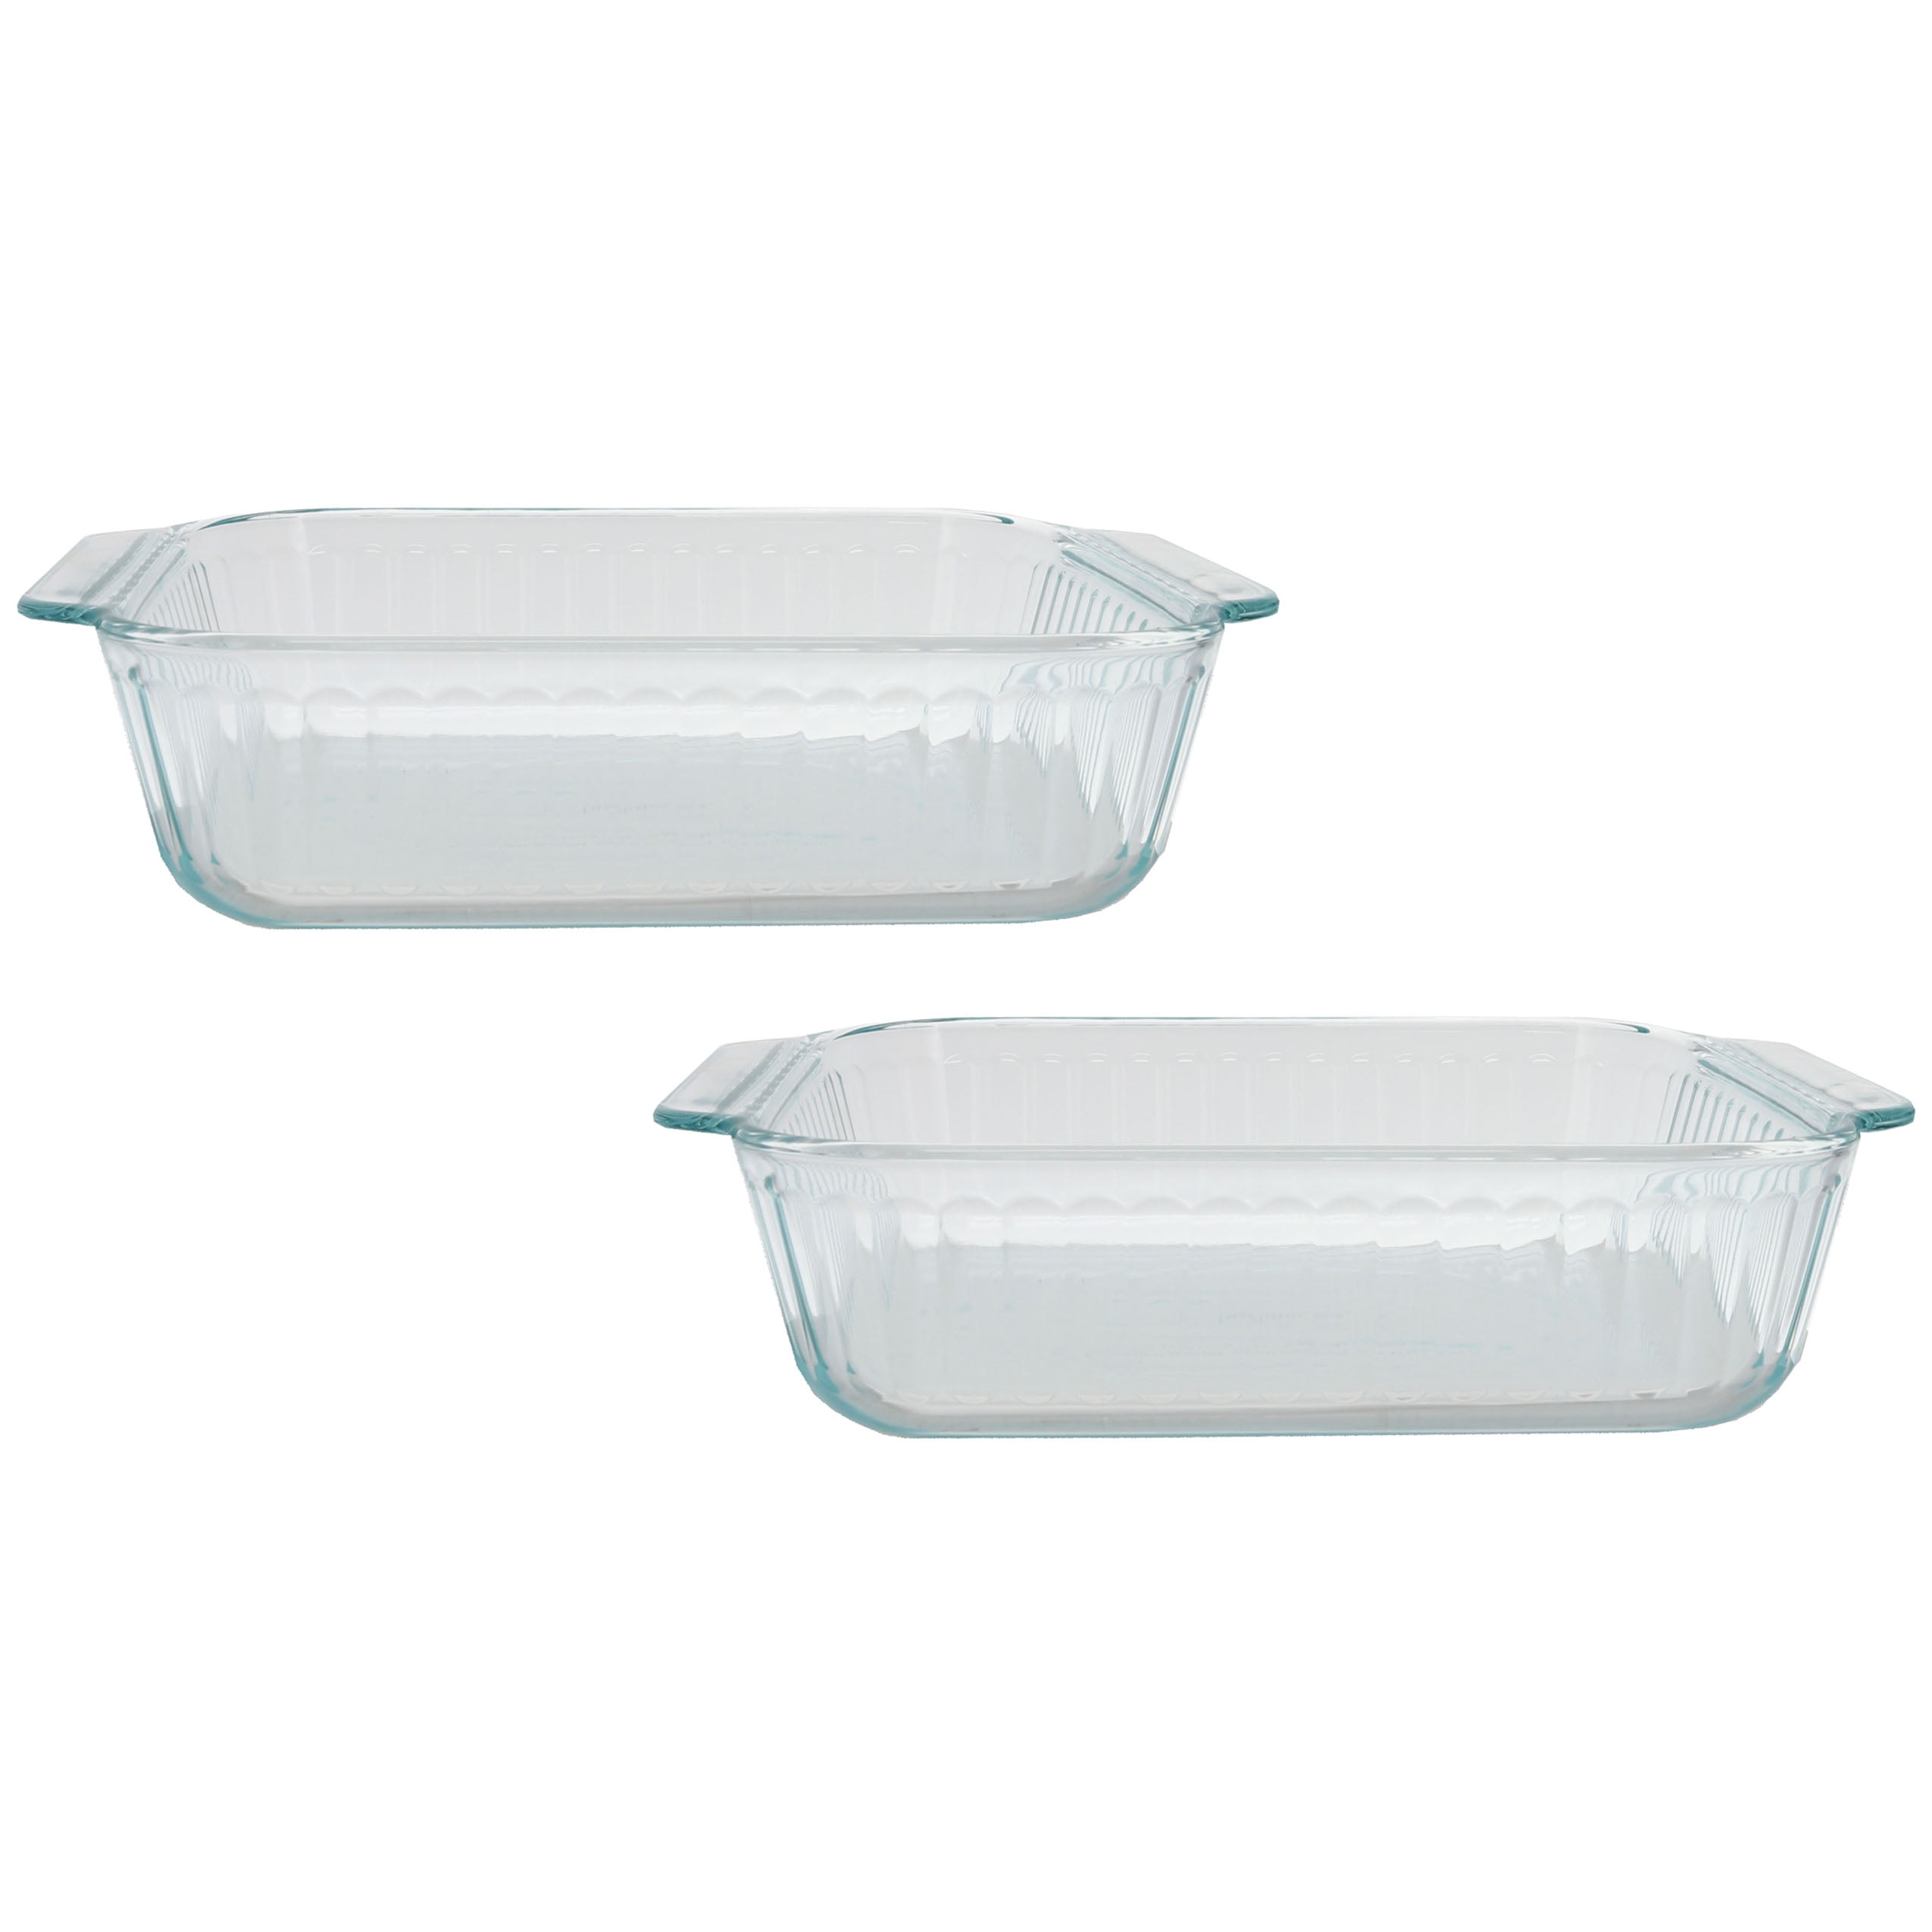 Pyrex 8 in. x 12 in. 2-Compartment Divided Glass Baking Dish Clear